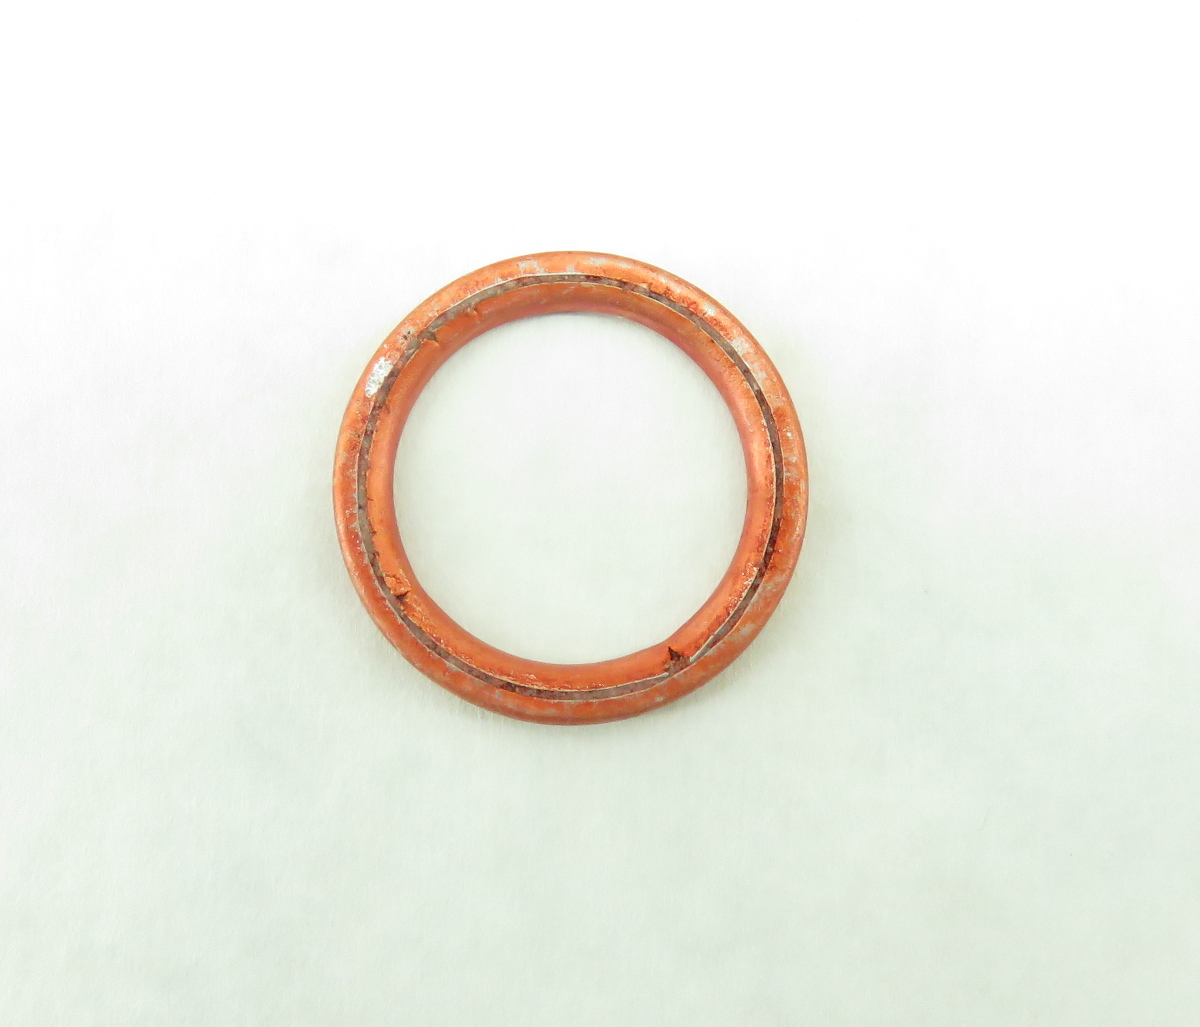 VF 400 FD 1985 Replacement Copper Exhaust Gasket UK Model NC13